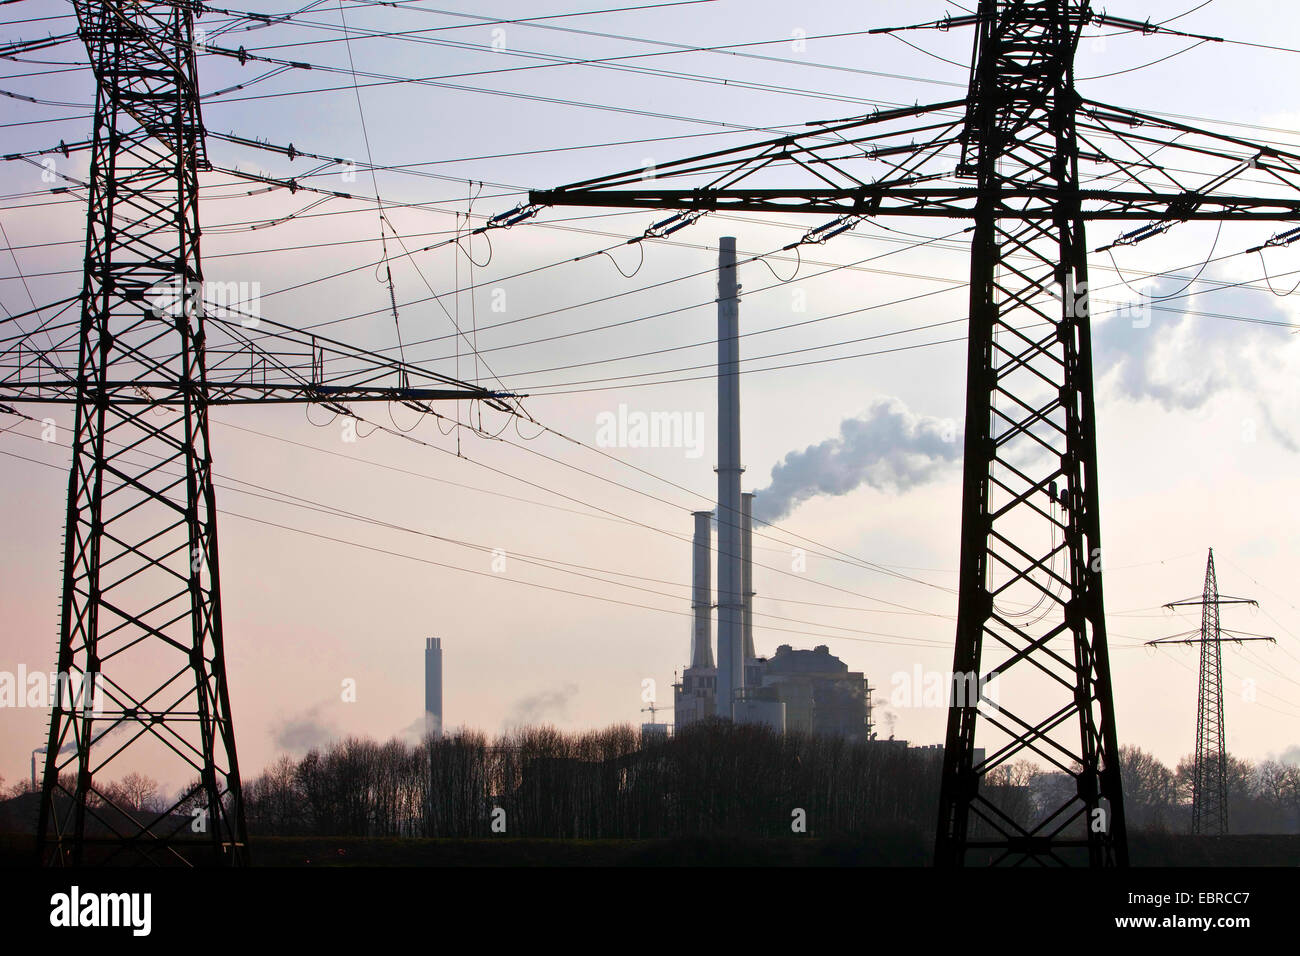 power poles with high voltage power lines and industry, Germany, North Rhine-Westphalia Stock Photo